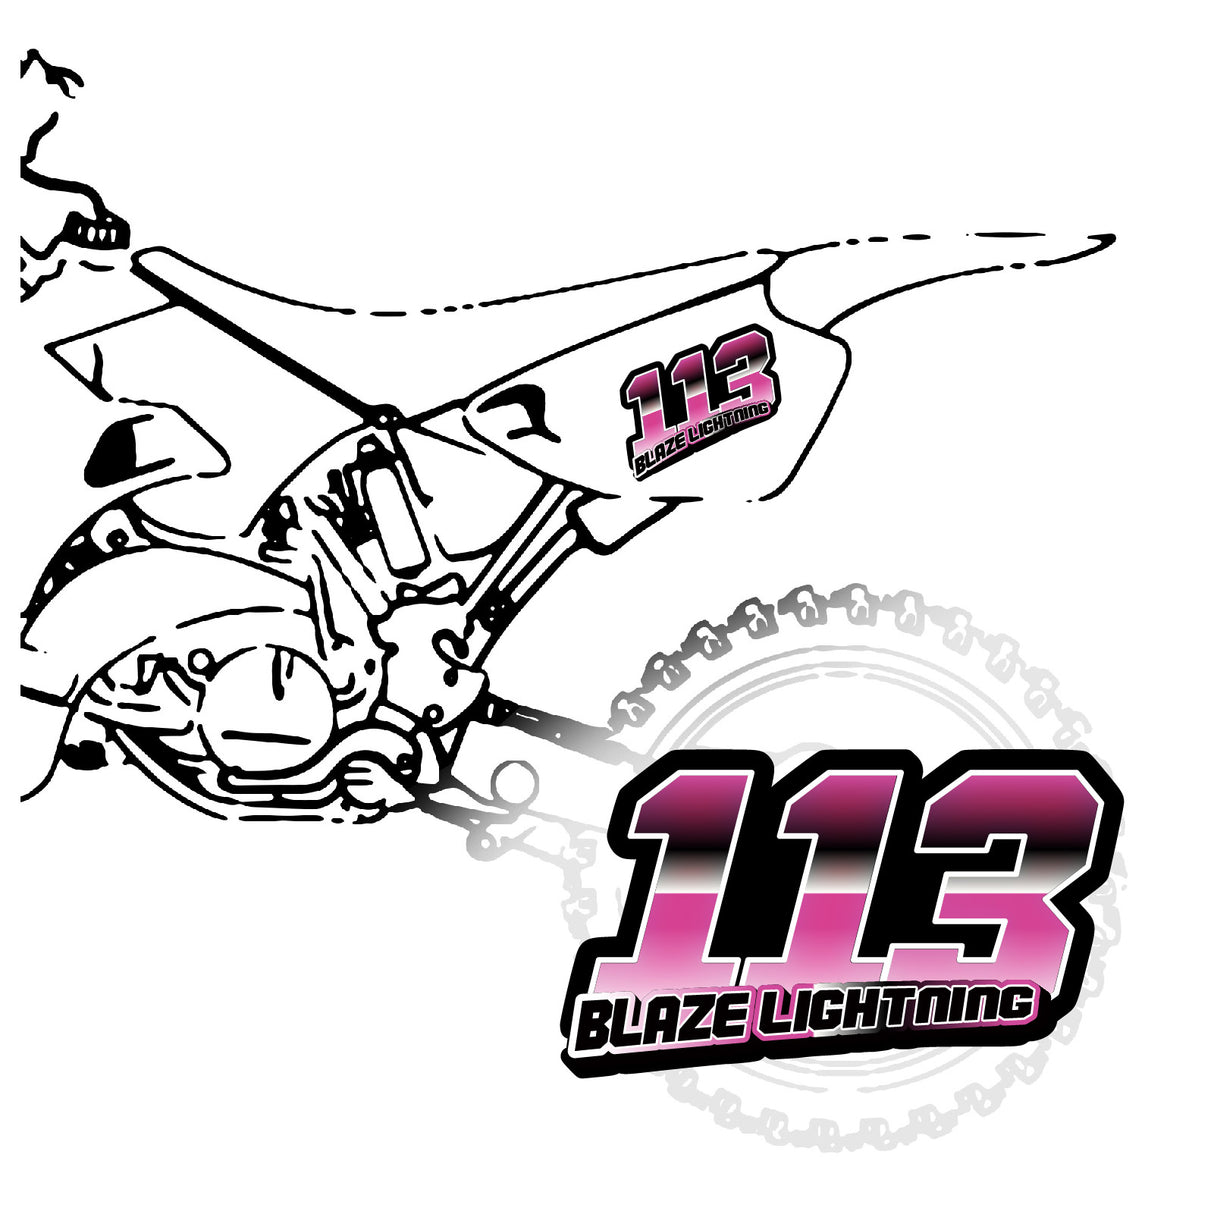 Looking for a racing number sticker that's as cool as your ride? Look no further! Our custom designs feature bold graphics, sleek lines, and the option to add your own number and name. So whether you're tearing up the track or cruising the streets, make sure you do it in style with our racing number stickers.